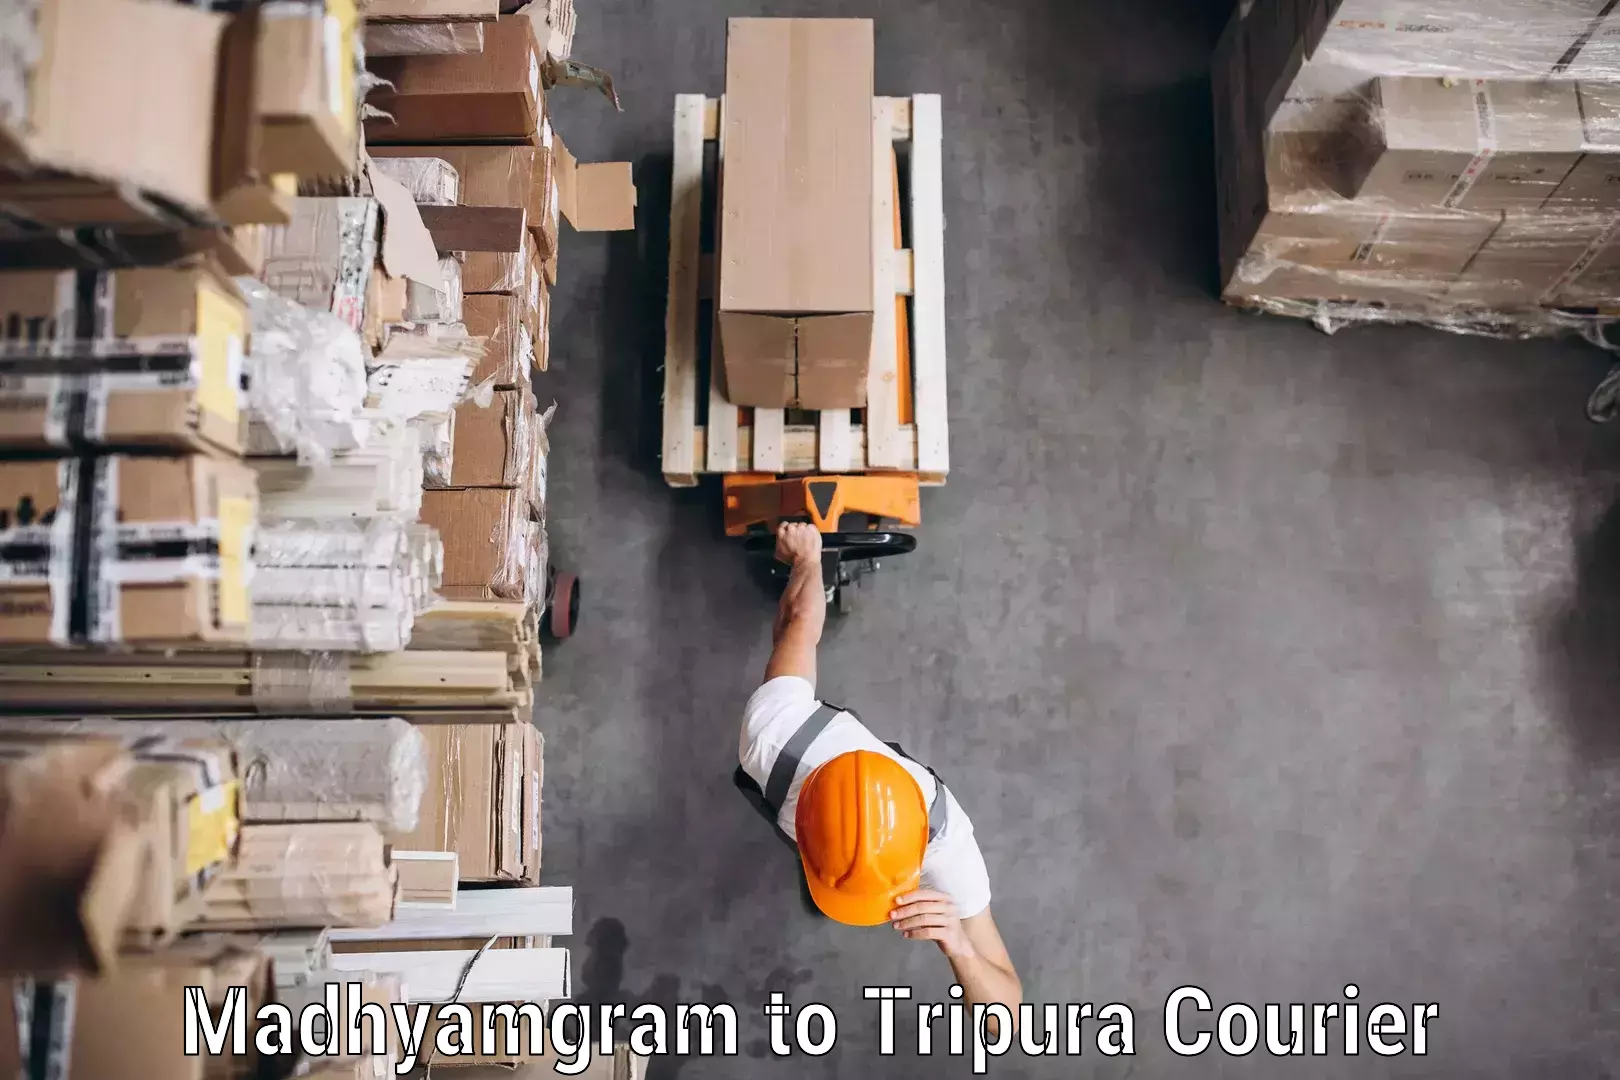 Courier service partnerships in Madhyamgram to Tripura